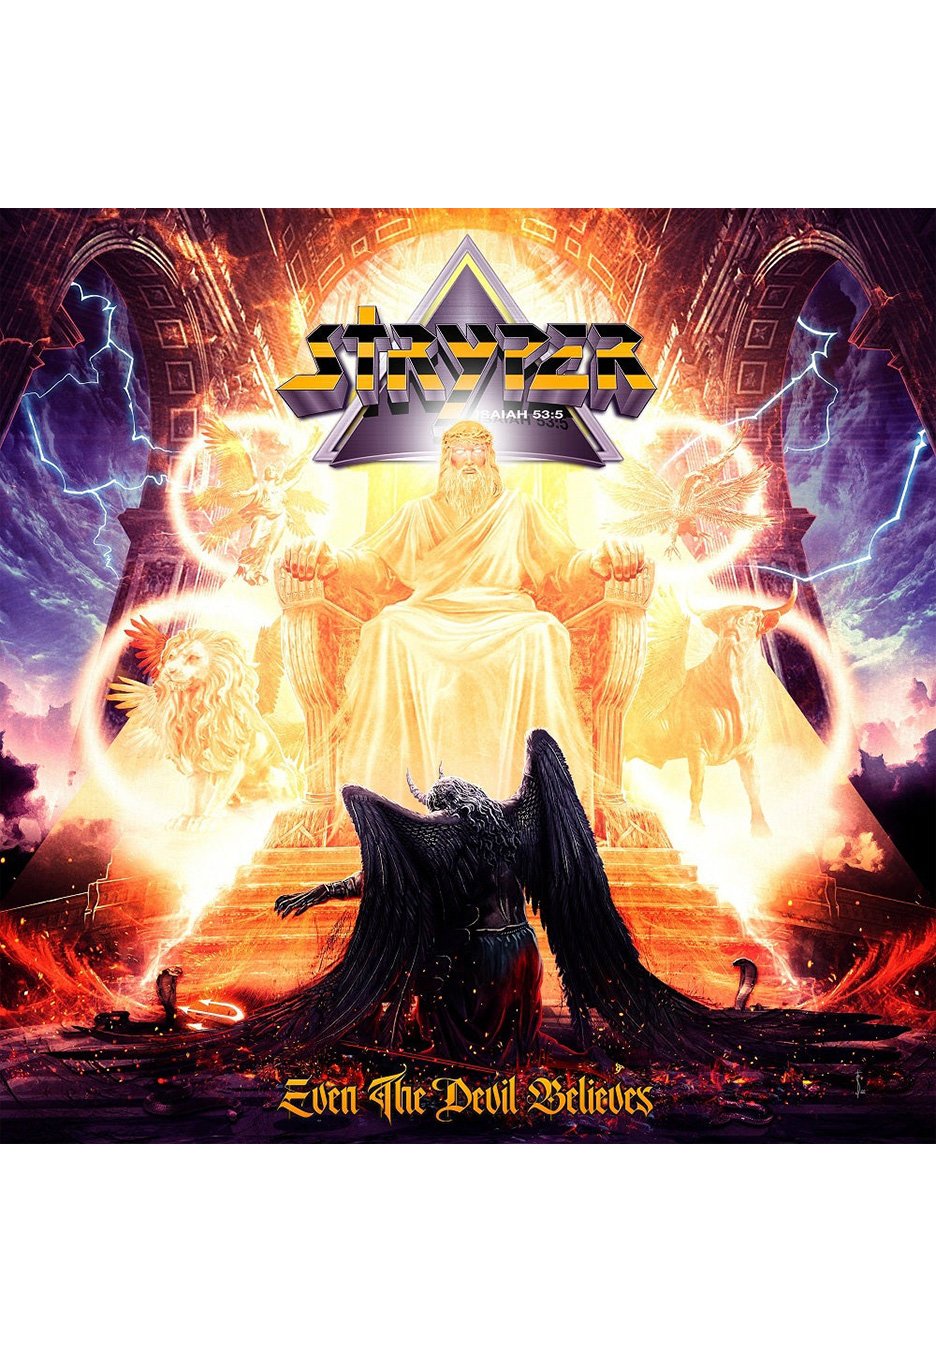 Stryper - Even The Devil Clear Red - Colored Vinyl